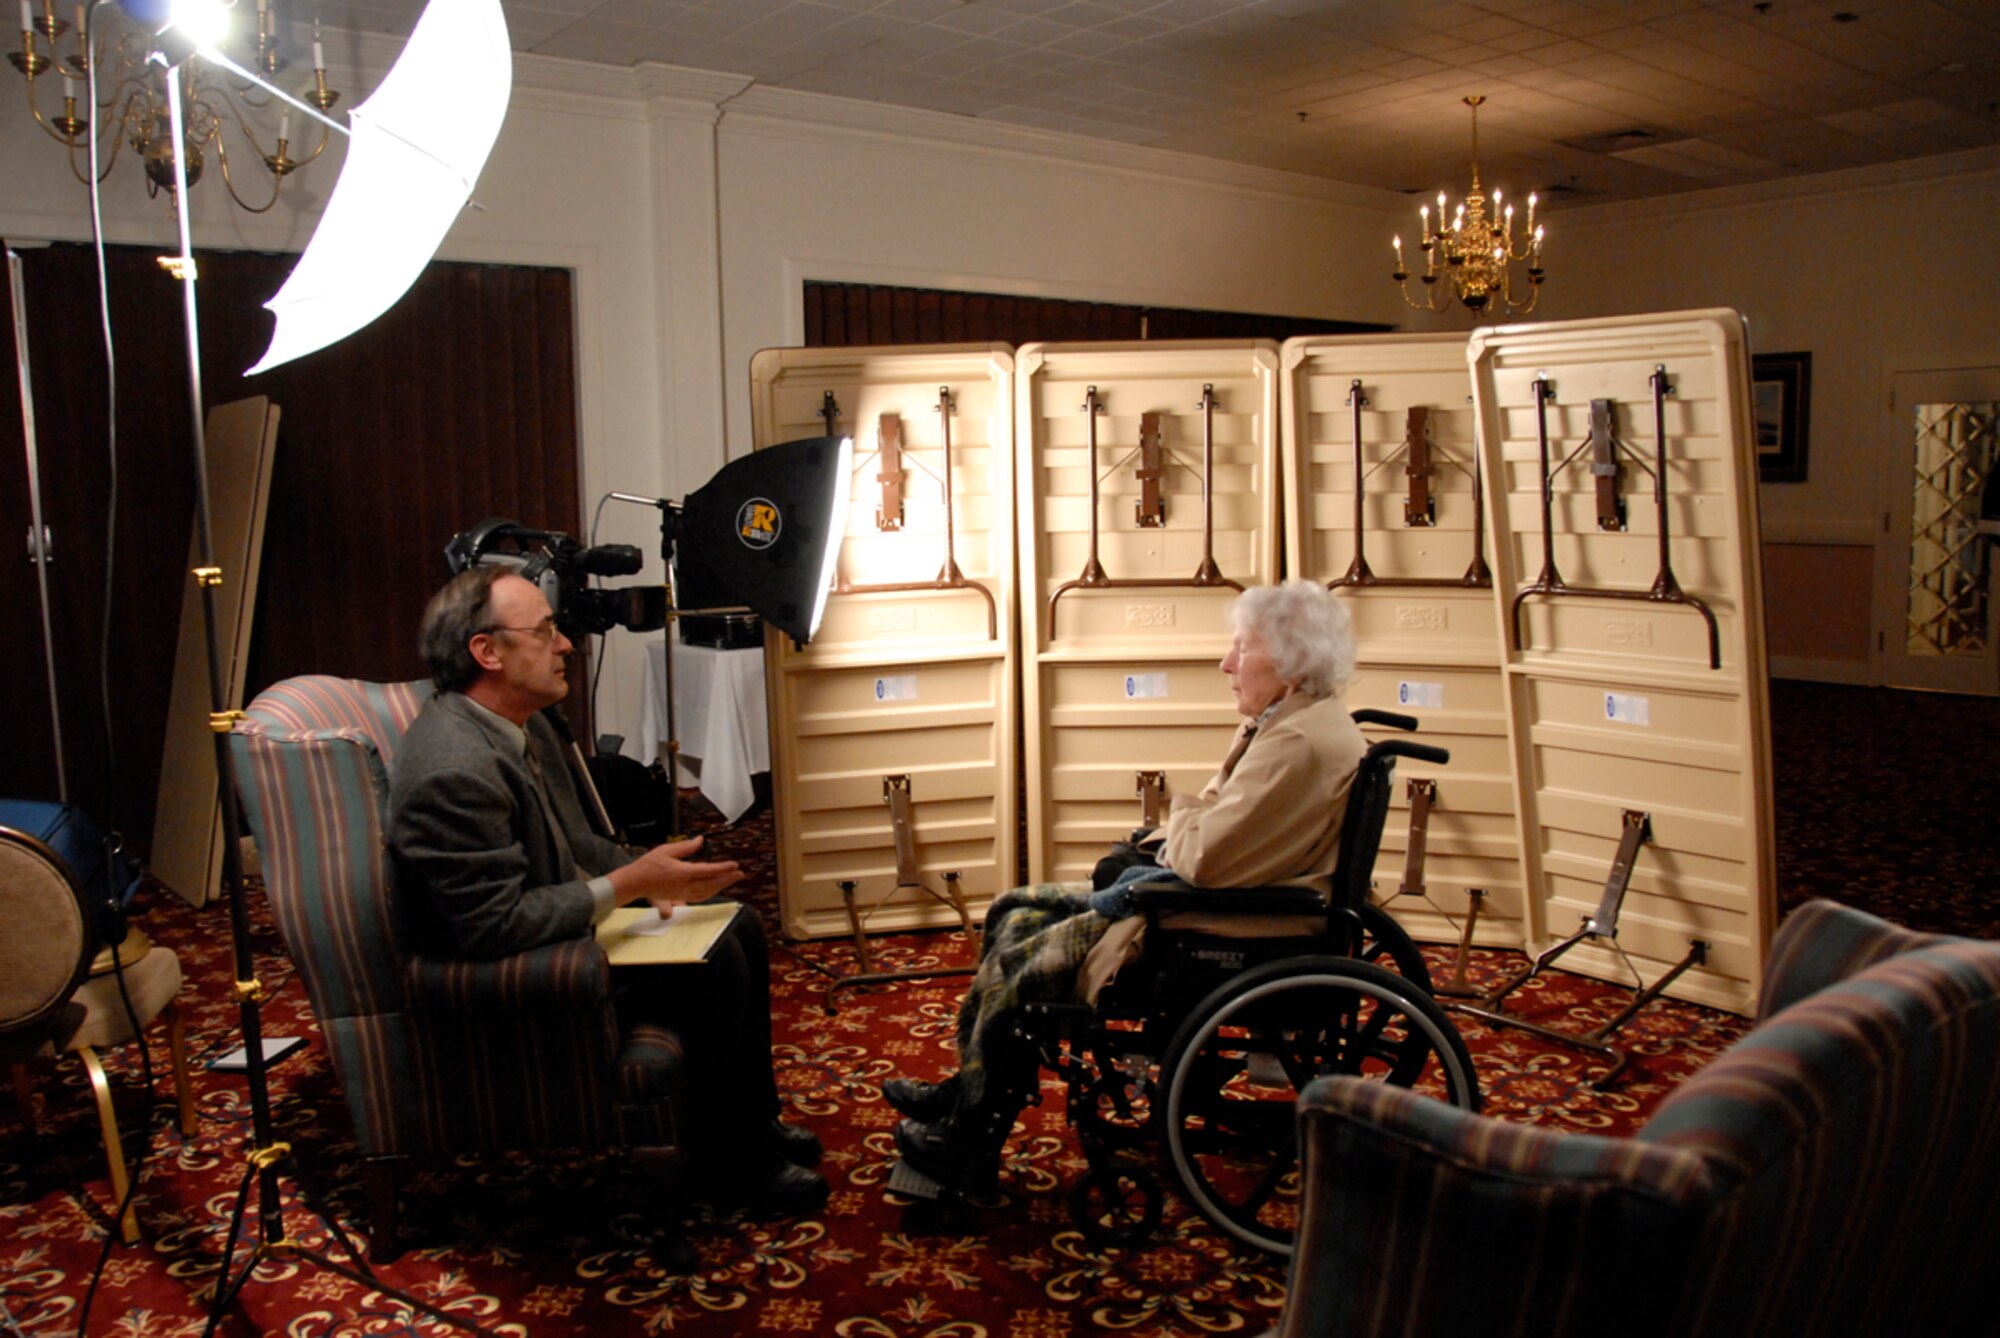 J.C. Corcoran, 66th Air Base Wing Public Affairs, interviews retired Chief Master Sergeant Esther MacKay as part of the Living History Project, a documentary highlighting the lives of those who have significantly contributed to Air Force heritage. Chief MacKay, 101, is the oldest living Air Force chief master sergeant. (US Air Force Photo by 1st Lt. Martha Petersante-Gioia)